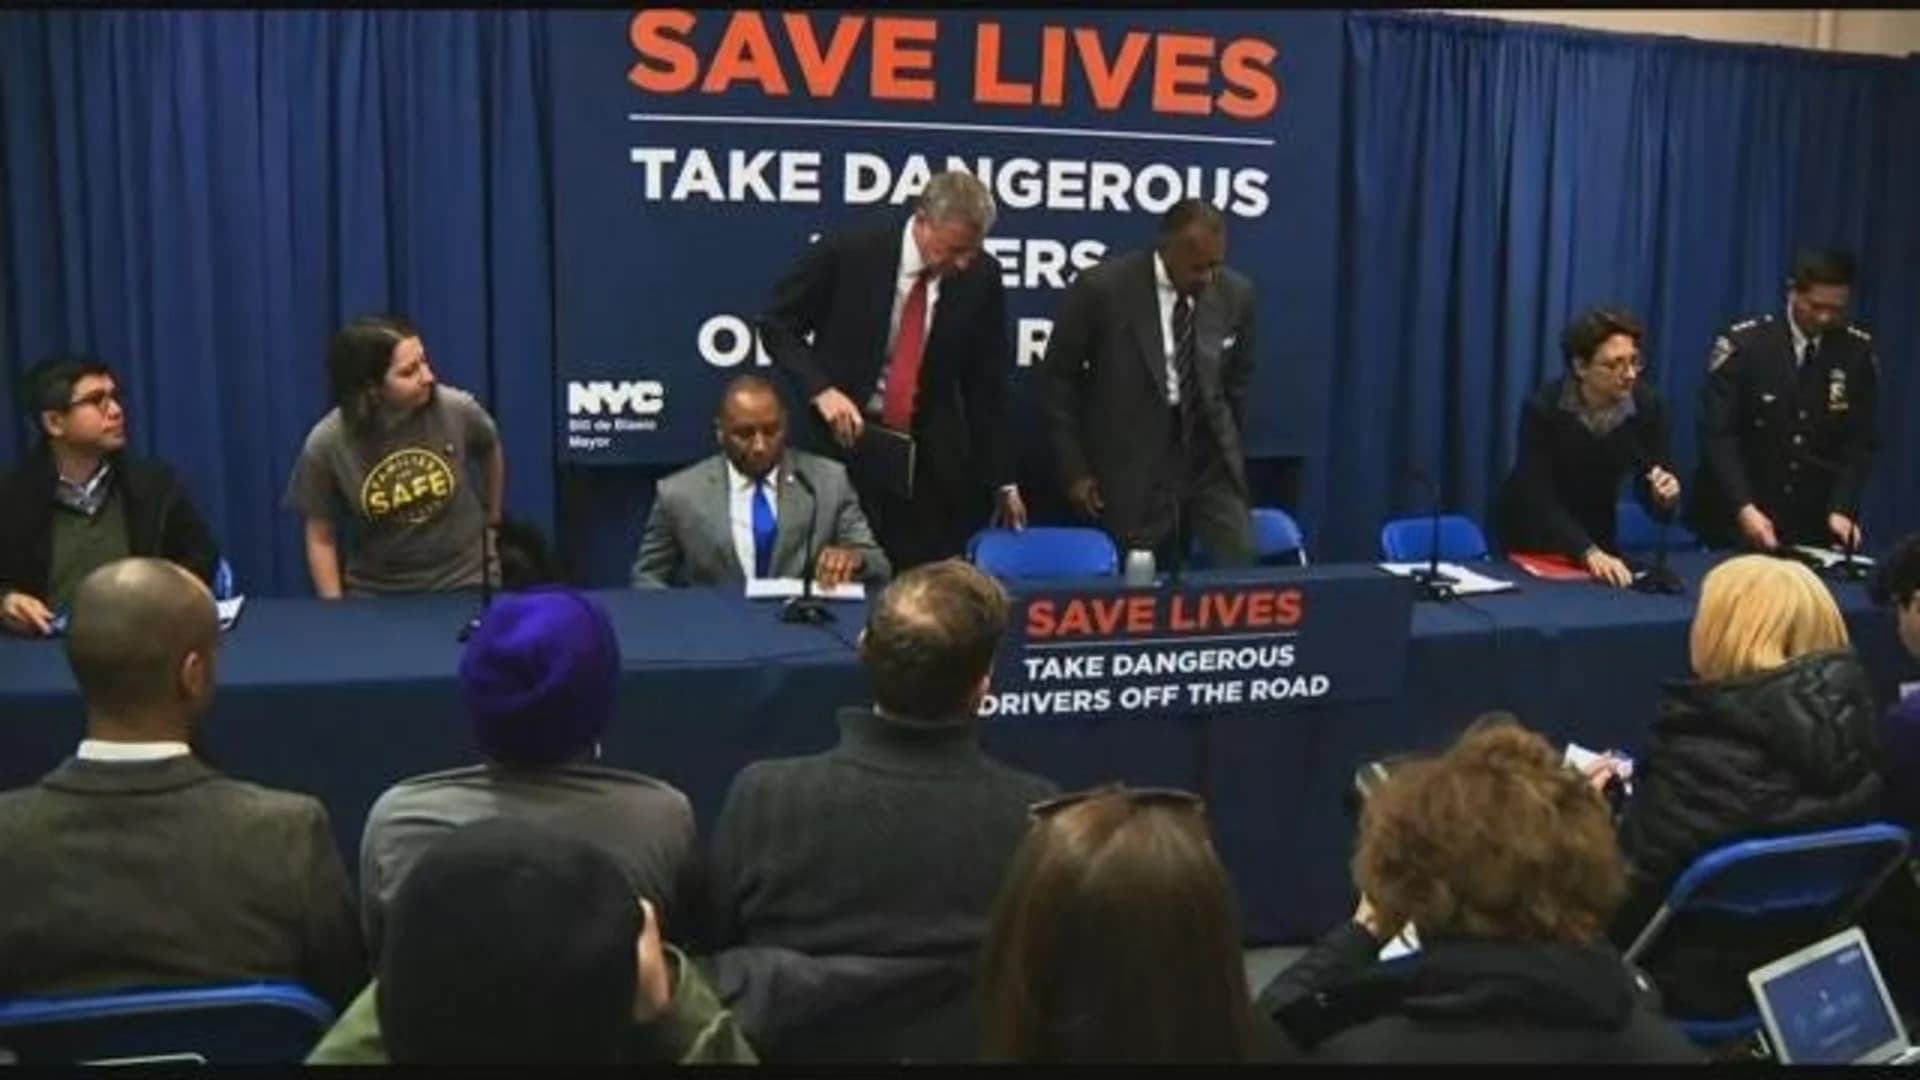 Mayor calls for new legislation, harsher penalties for reckless NY drivers